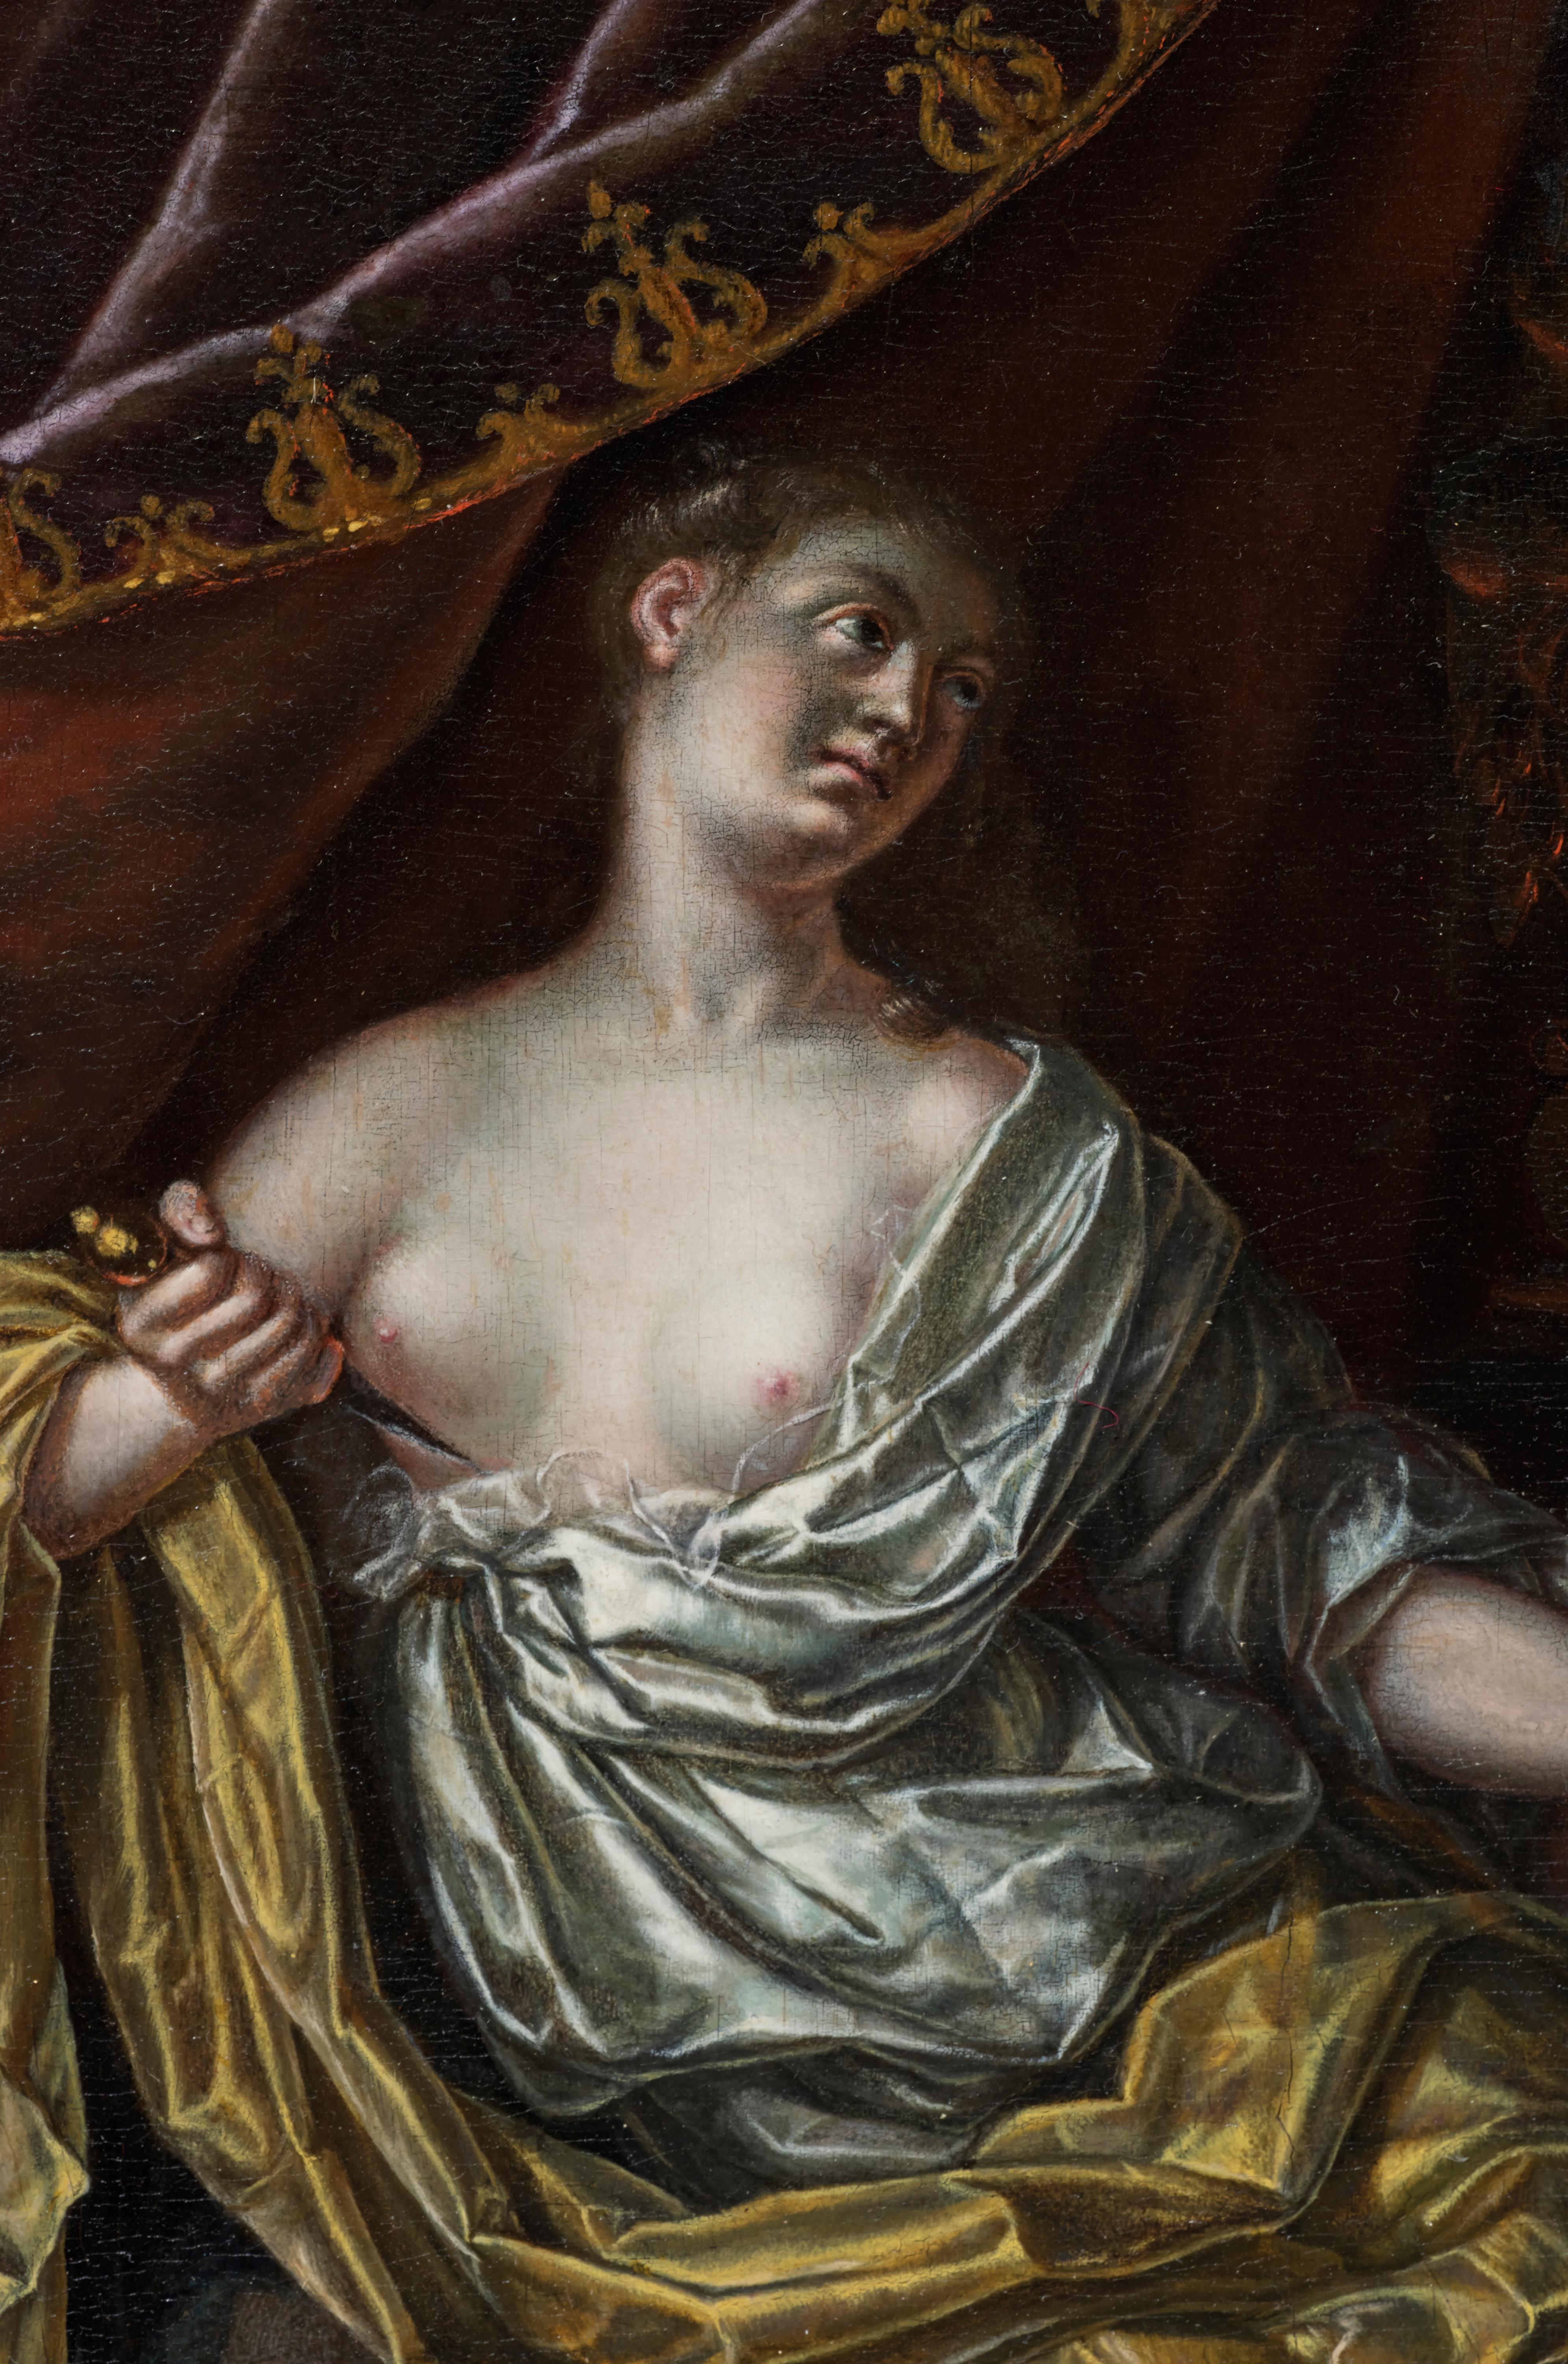 This painting of a murky sensuality by Johann Franz Meskens represents the terrible moment when Lucretia is about to kill herself. It bears witness to the persistence of the Baroque taste in the first third of the 18th century in Antwerp and in the